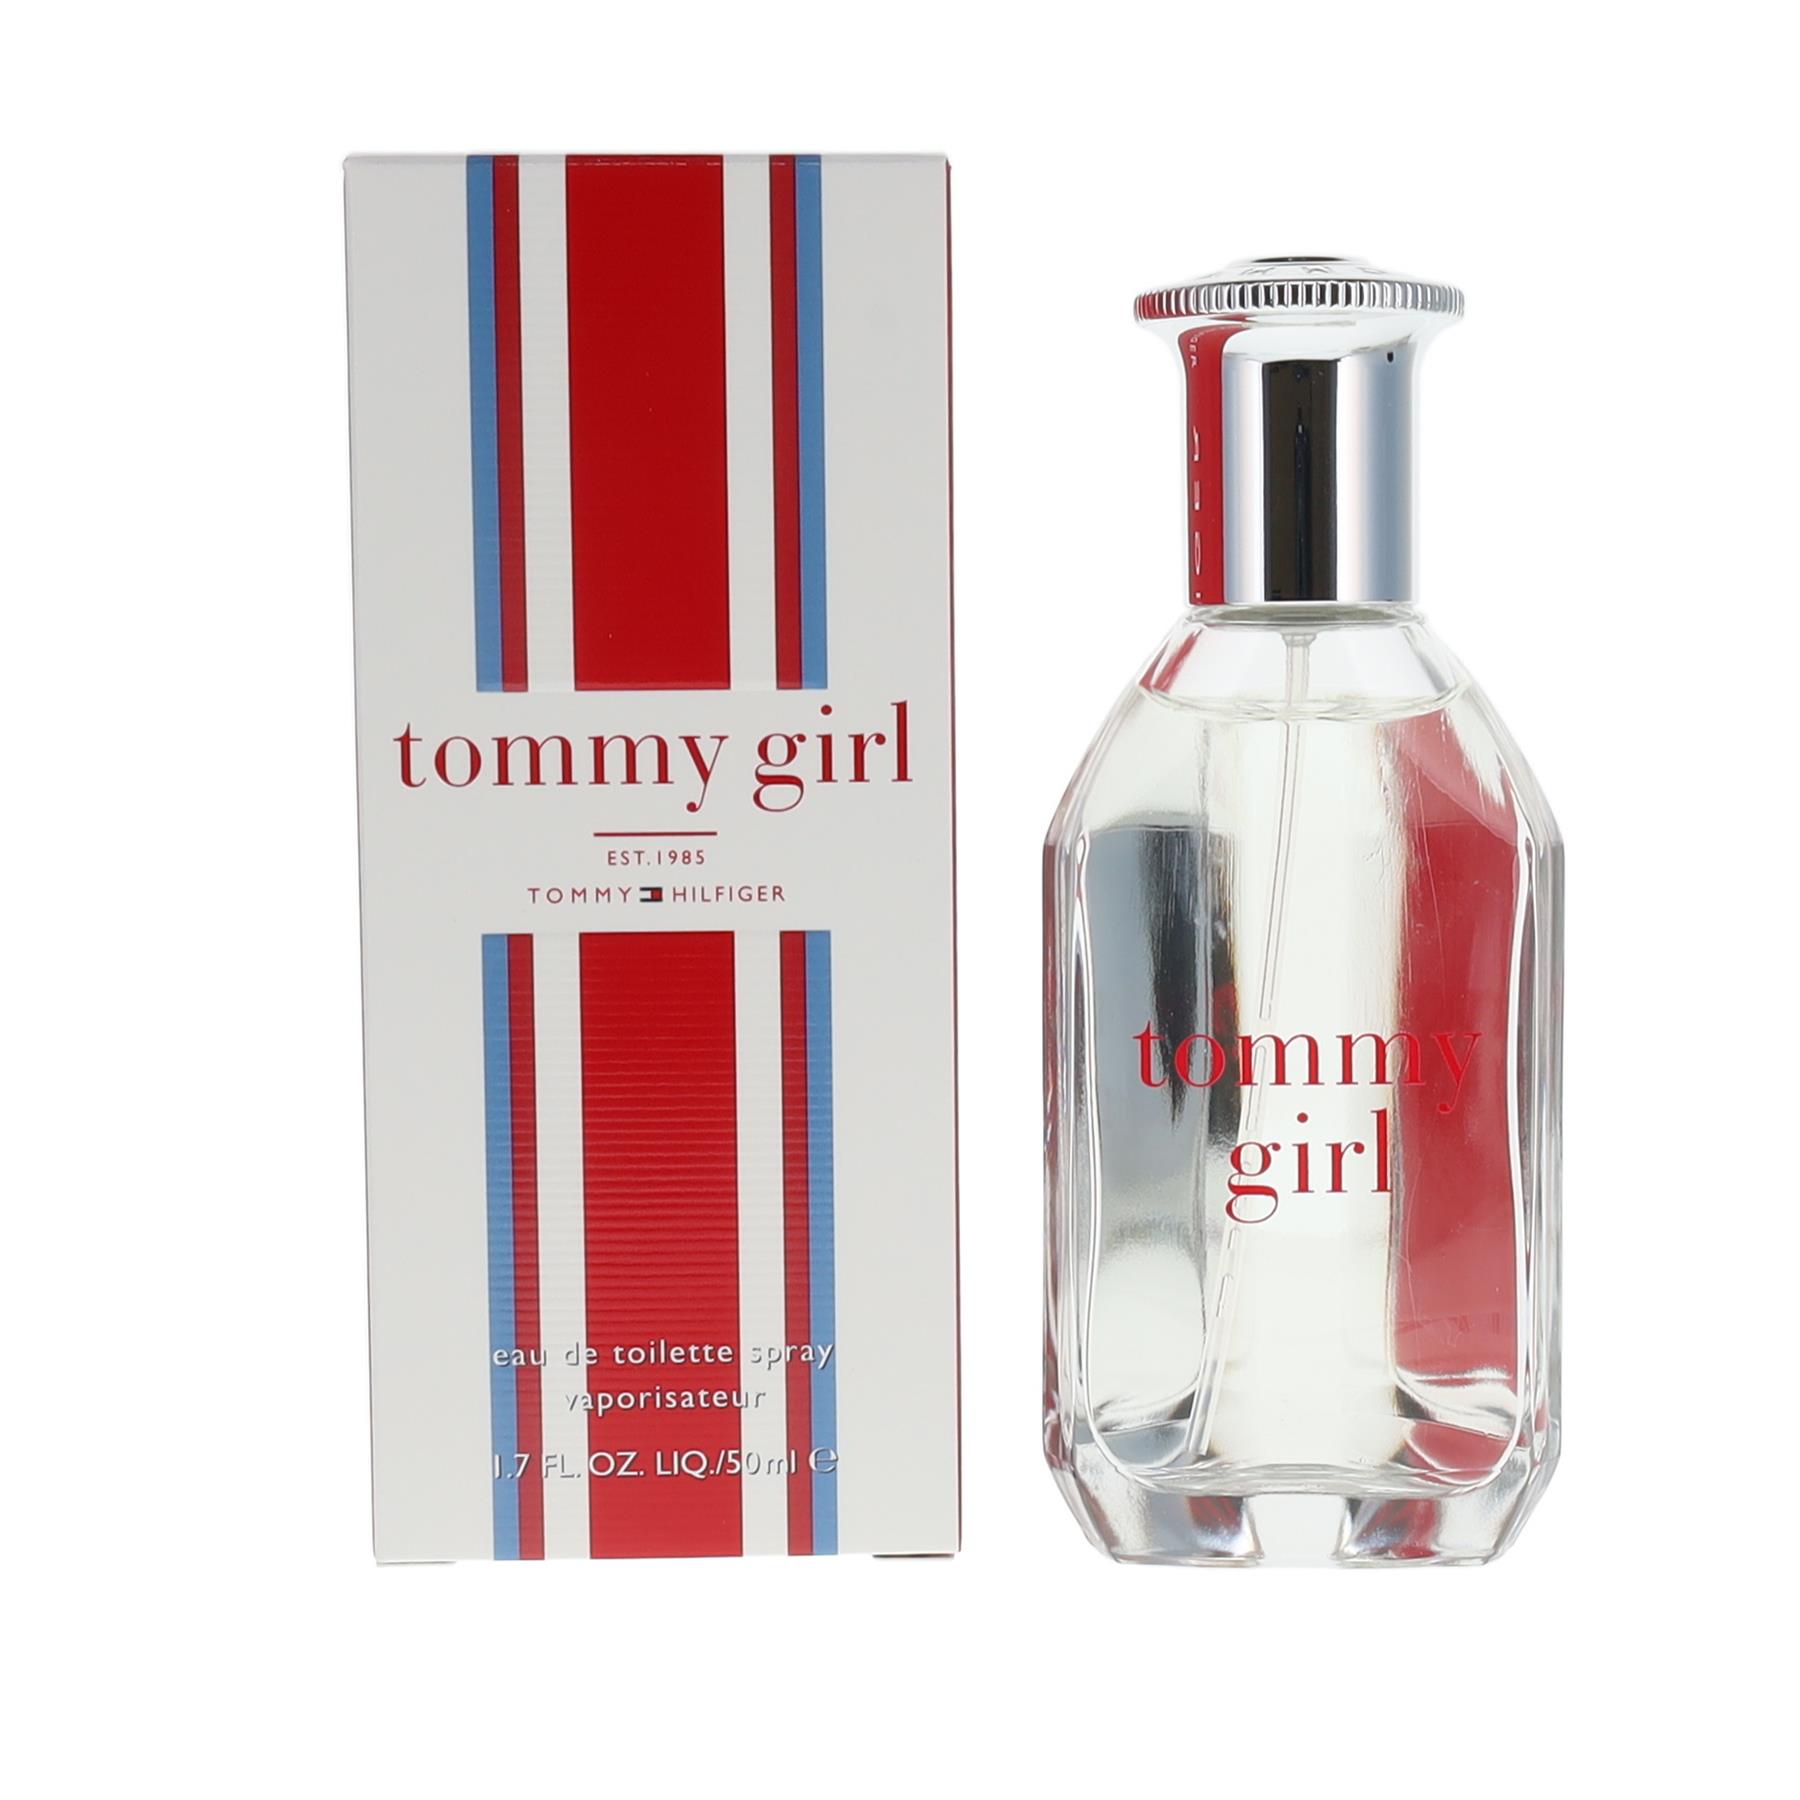 Tommy Hilfiger Tommy Girl 50ml Eau de Toilette Spray for Her from Perfume Plus Direct